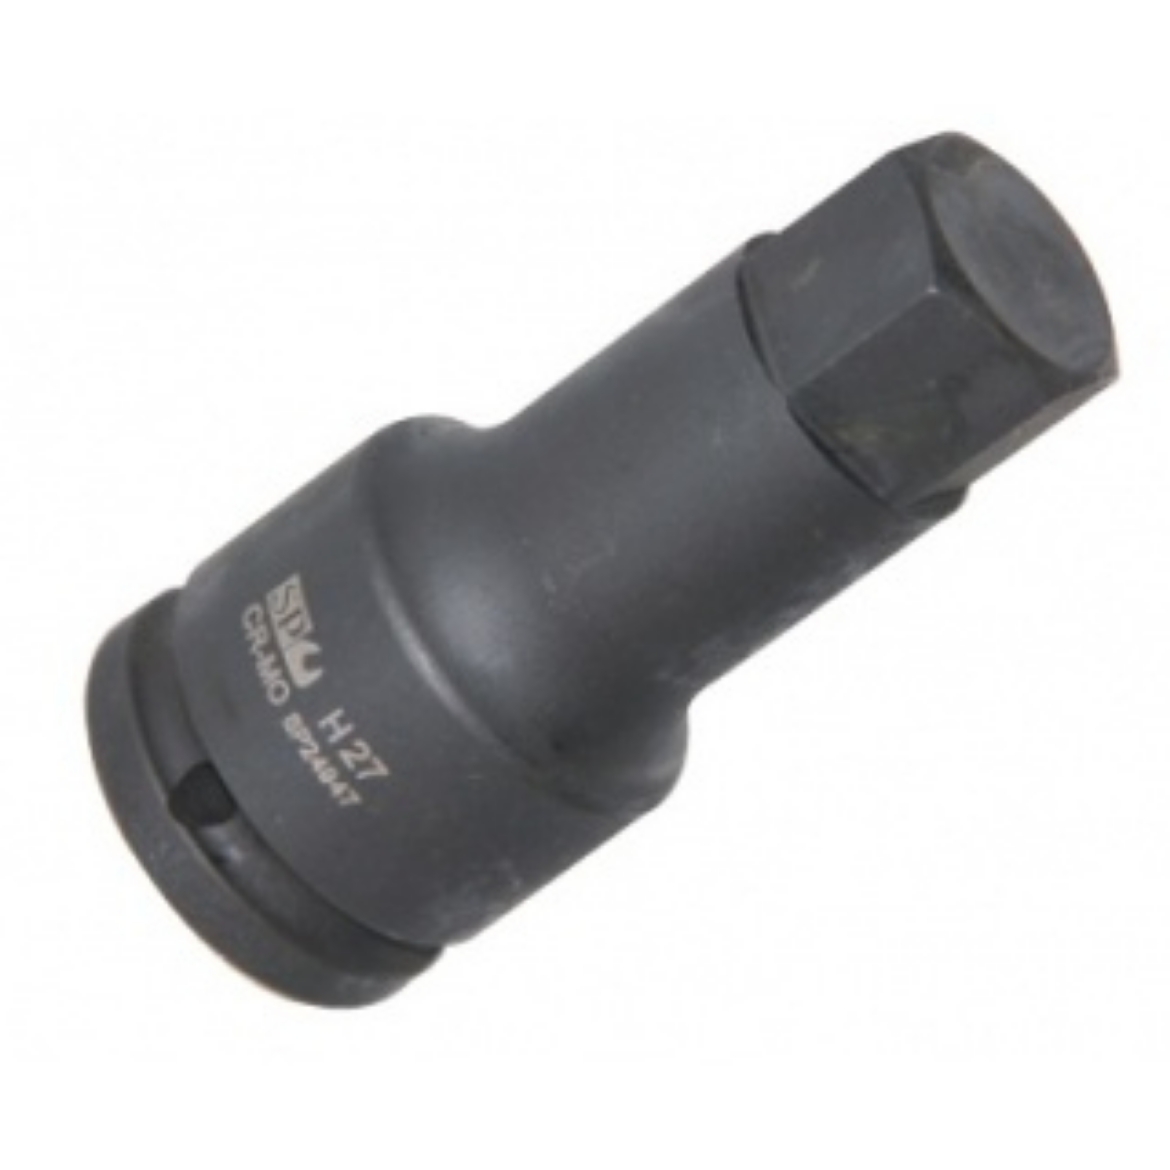 Picture of SOCKET IMPACT 3/4"DR INHEX METRIC 27MM SP TOOLS